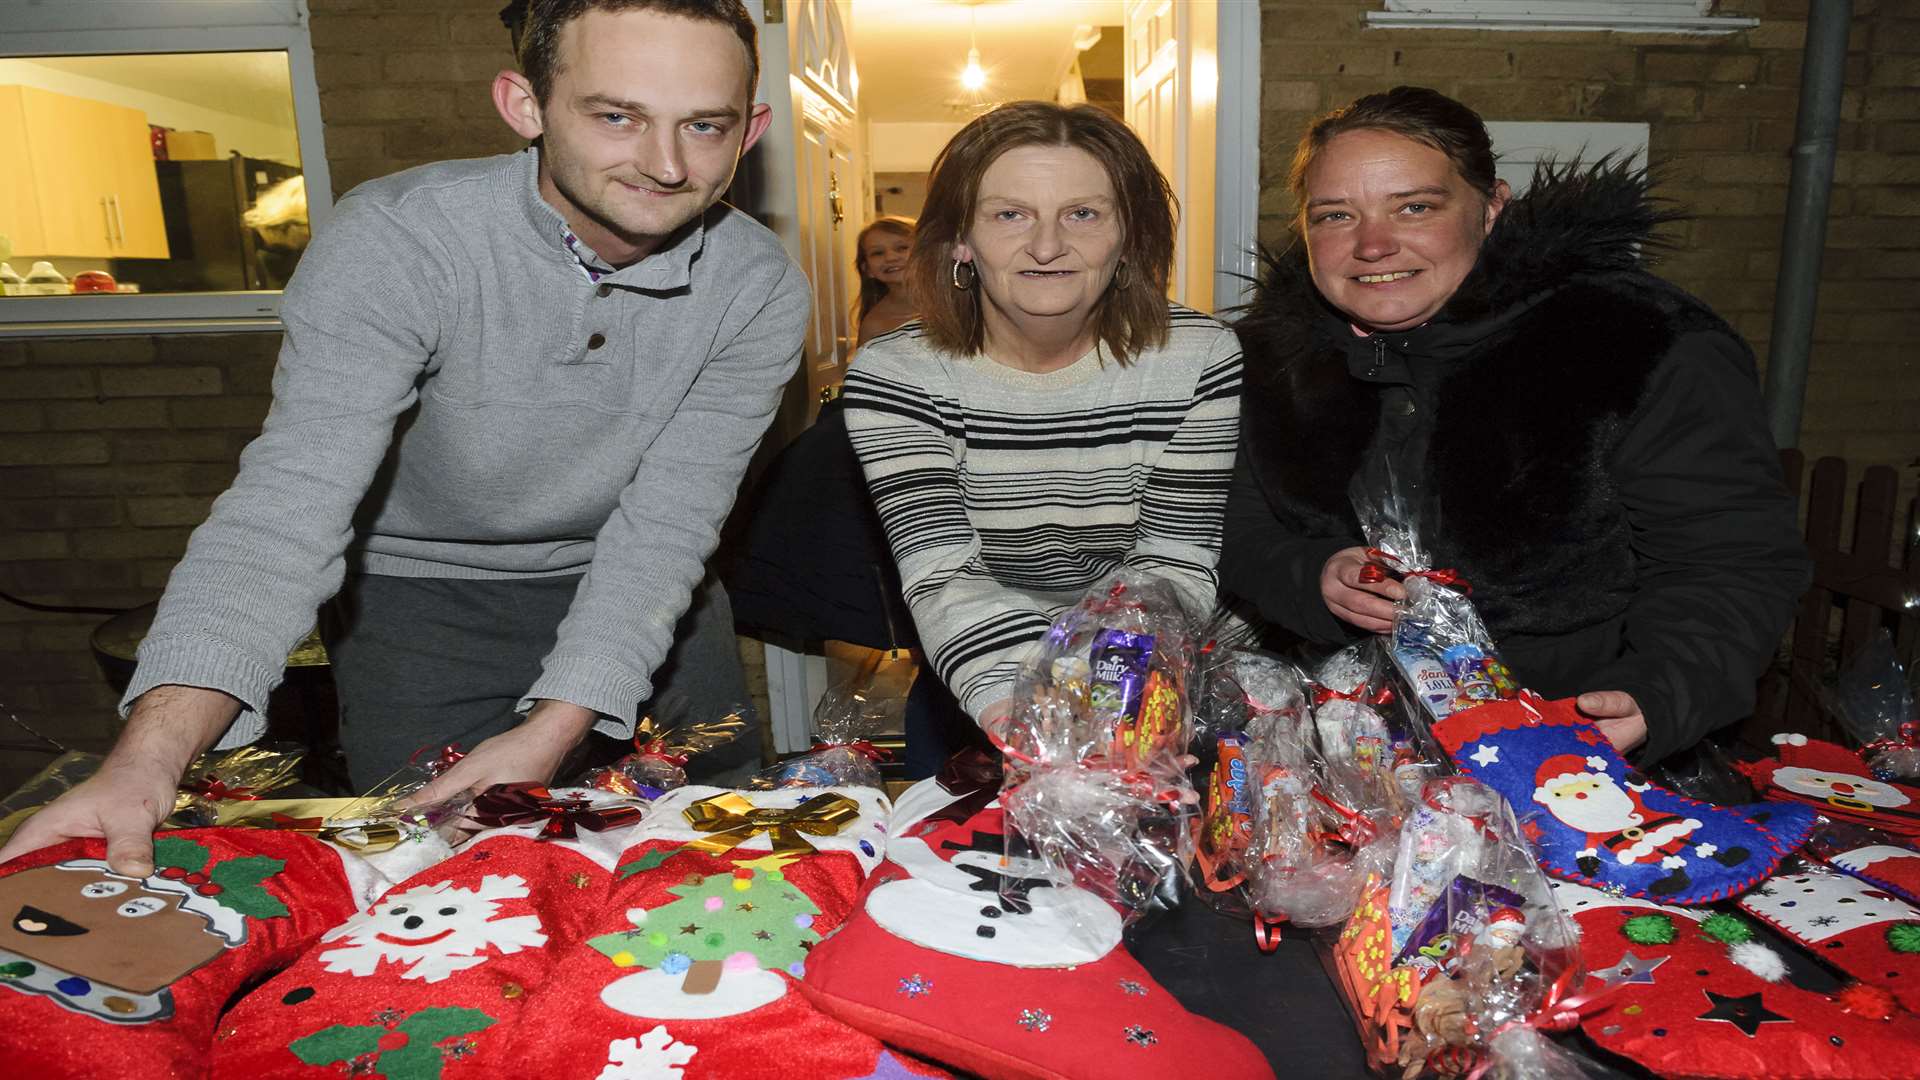 Gary Older, Veronica Older and Kelly Older, with Christmas trinkets for sale. The Light up a Life display at the home of the Older family, at Panters, Hextable, in aid of Help for Heroes and the Cystic Fibrosis Trust.